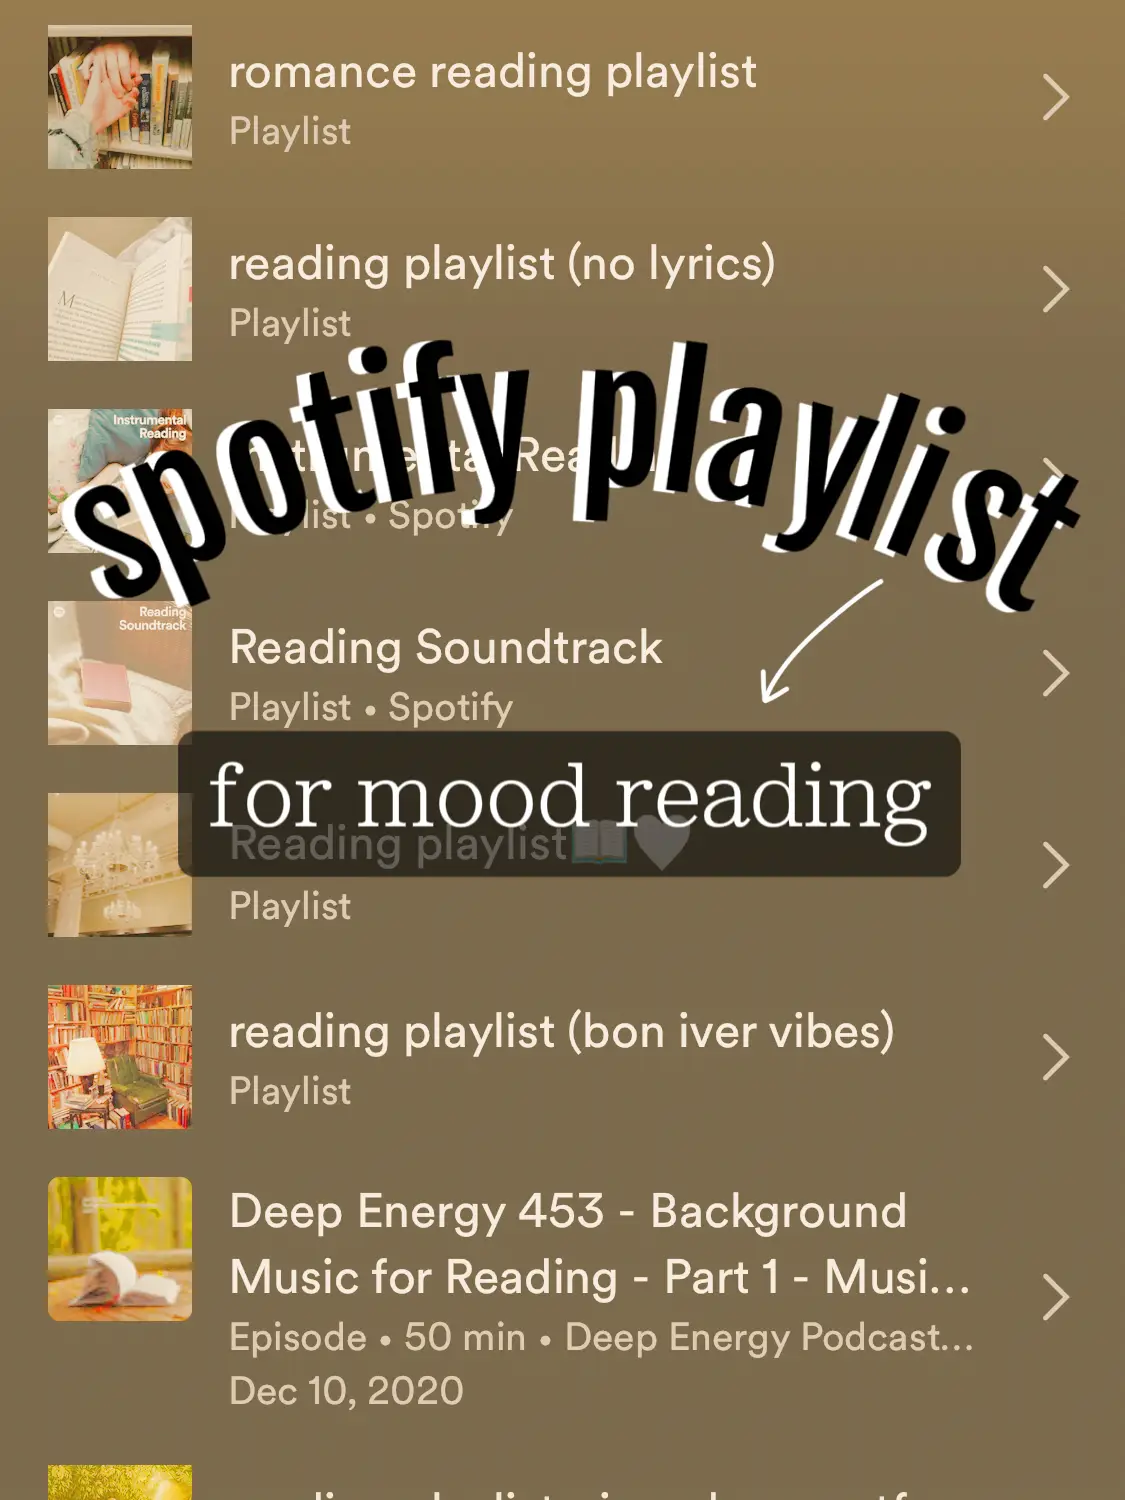 mood reading | spotify playlist🎶's images